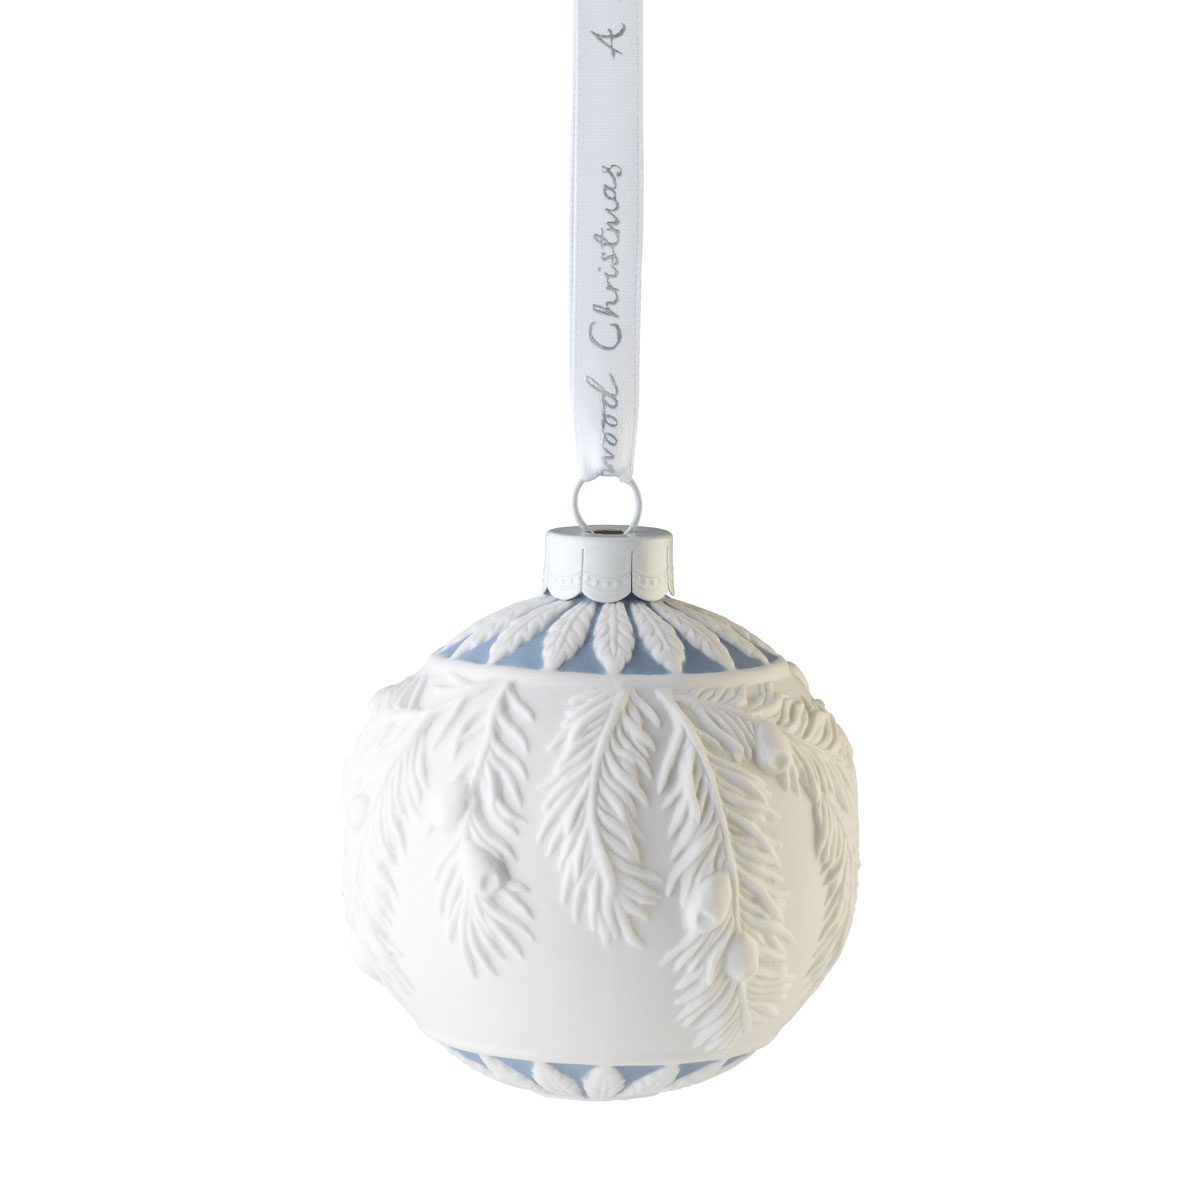 Wedgwood Frosted Pine Bauble Ball Ornament